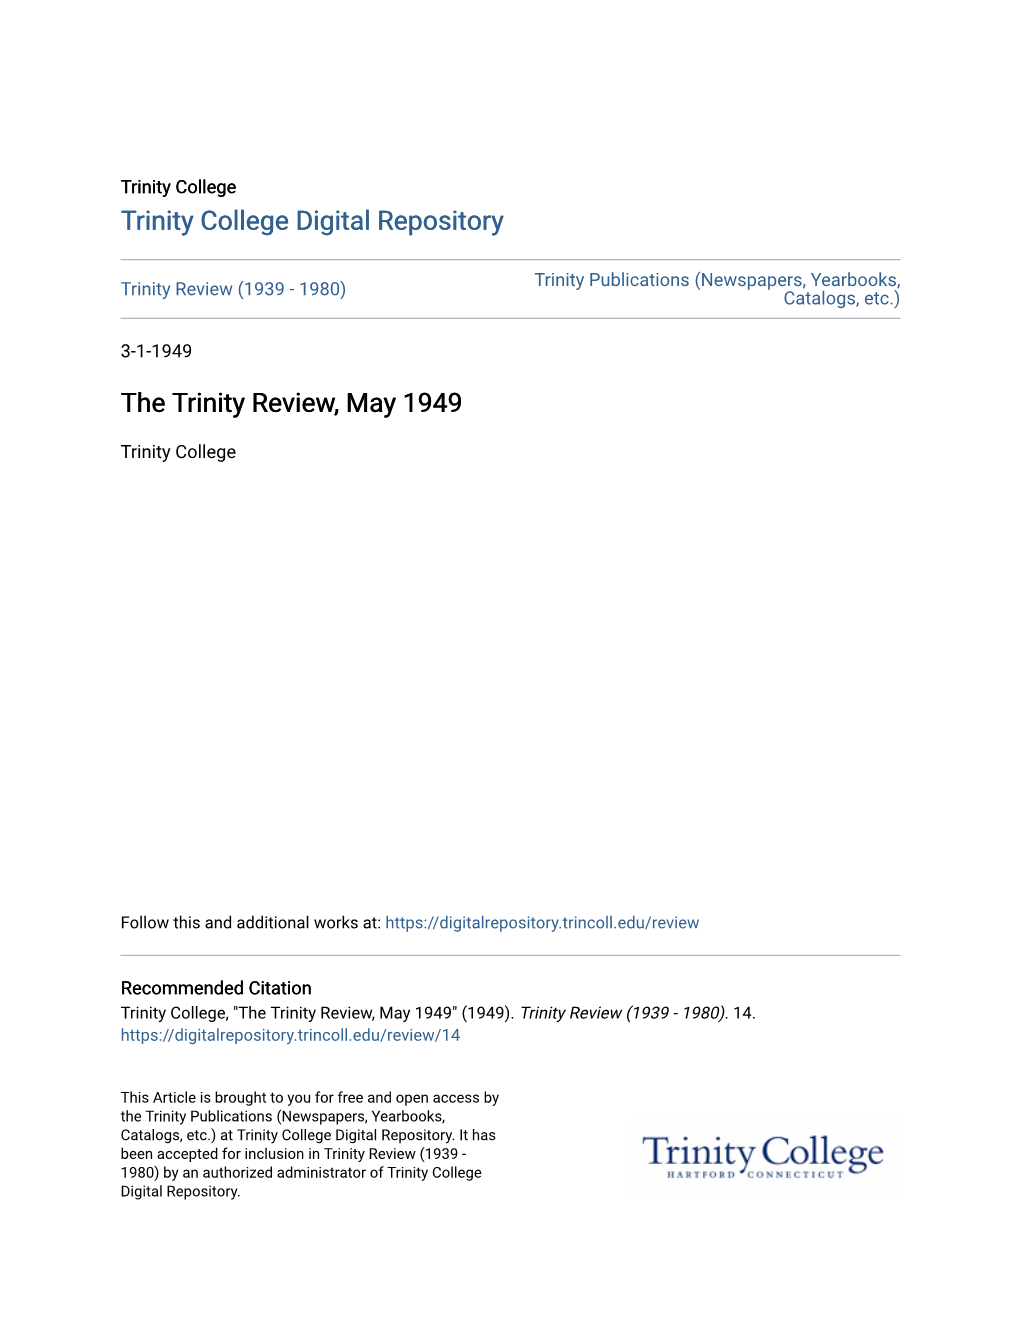 The Trinity Review, May 1949